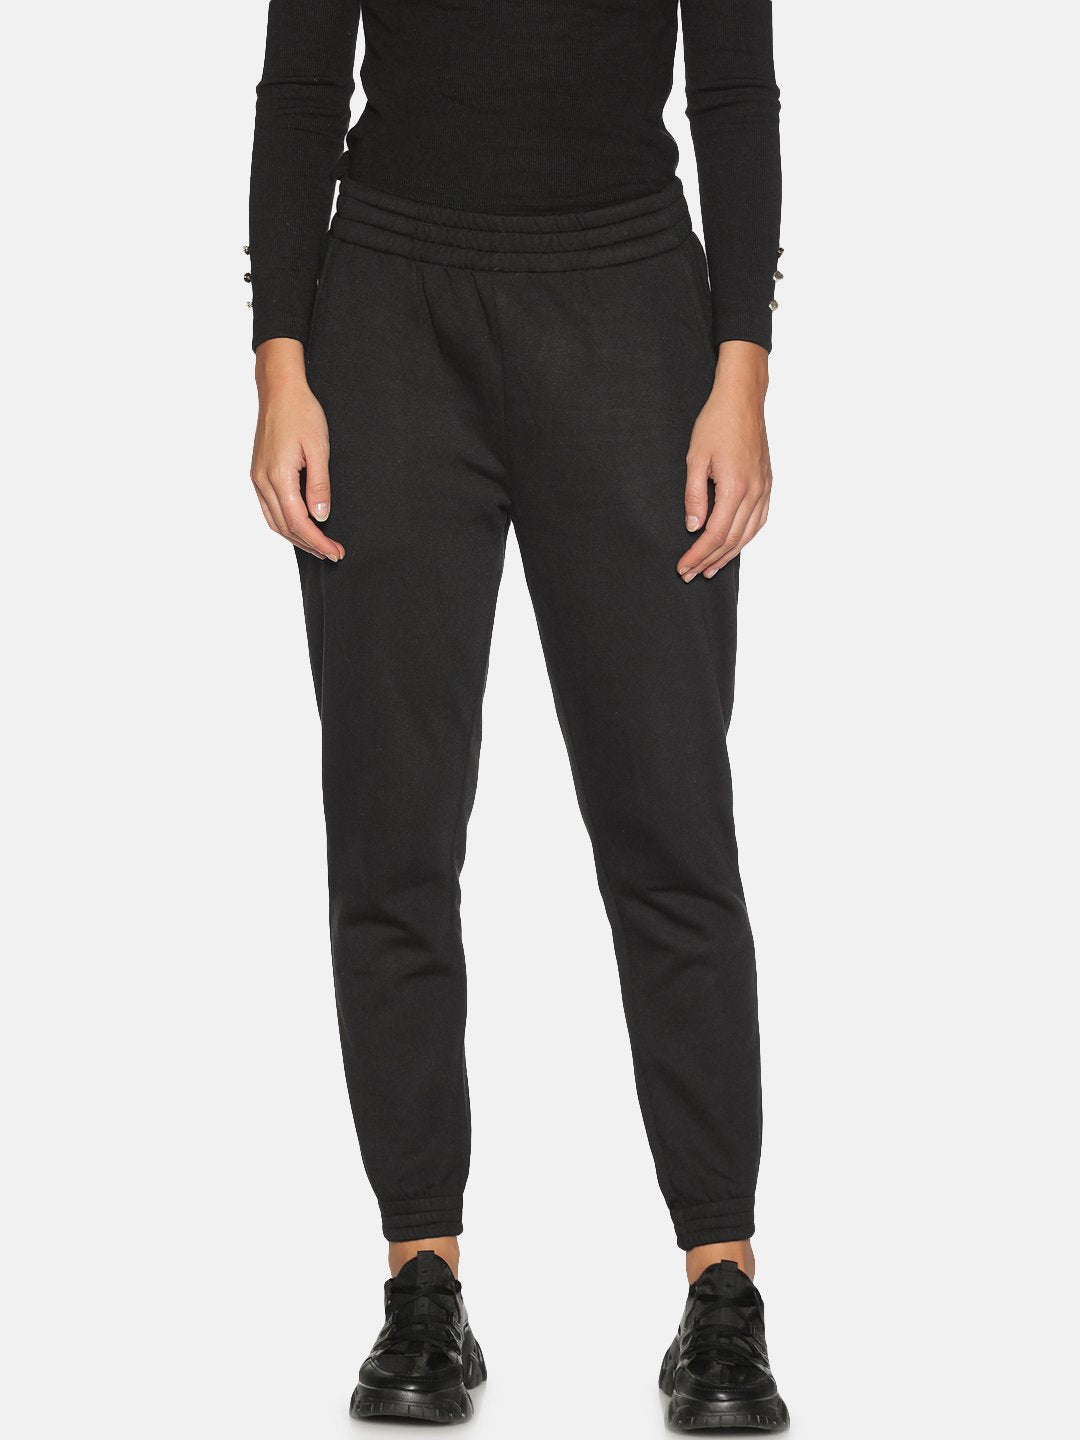 IS.U Black Relaxed Fit Joggers